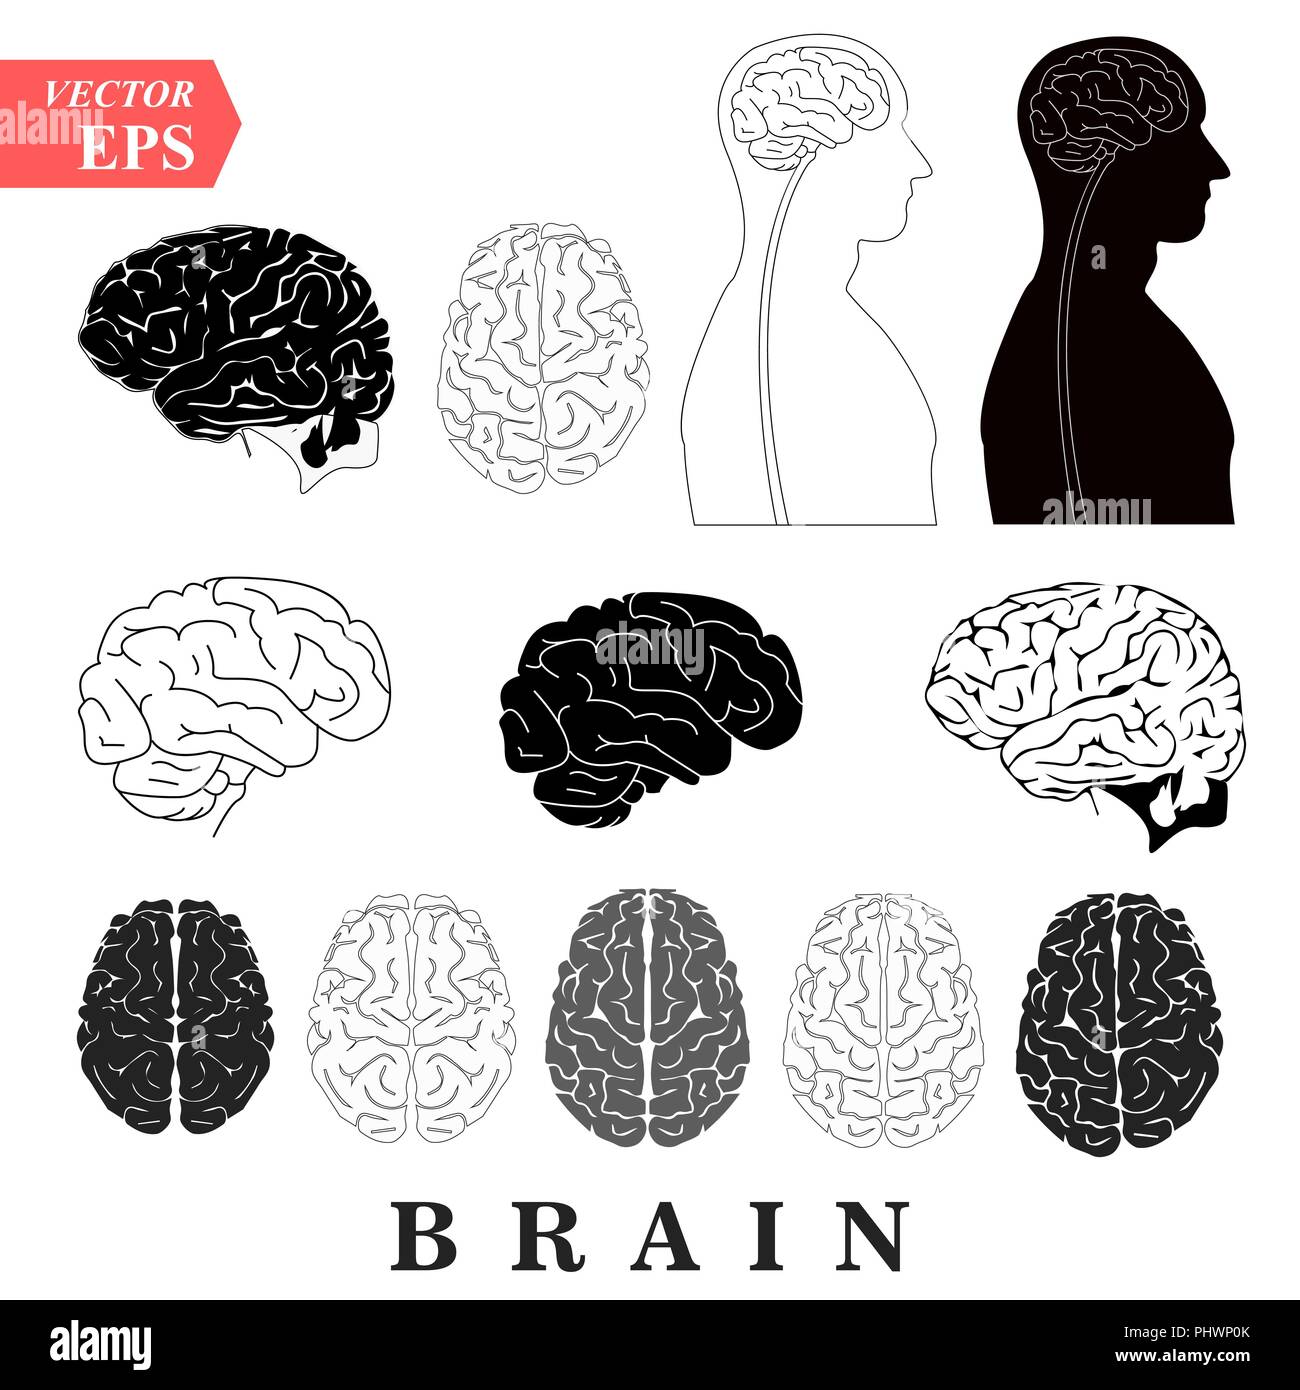 Human Brain Anatomy Collection set anterior inferior lateral and sagittal views spinal cord start lobes temporal frontal limbic parietal occipital anatomical science education cerebellum vector Stock Vector